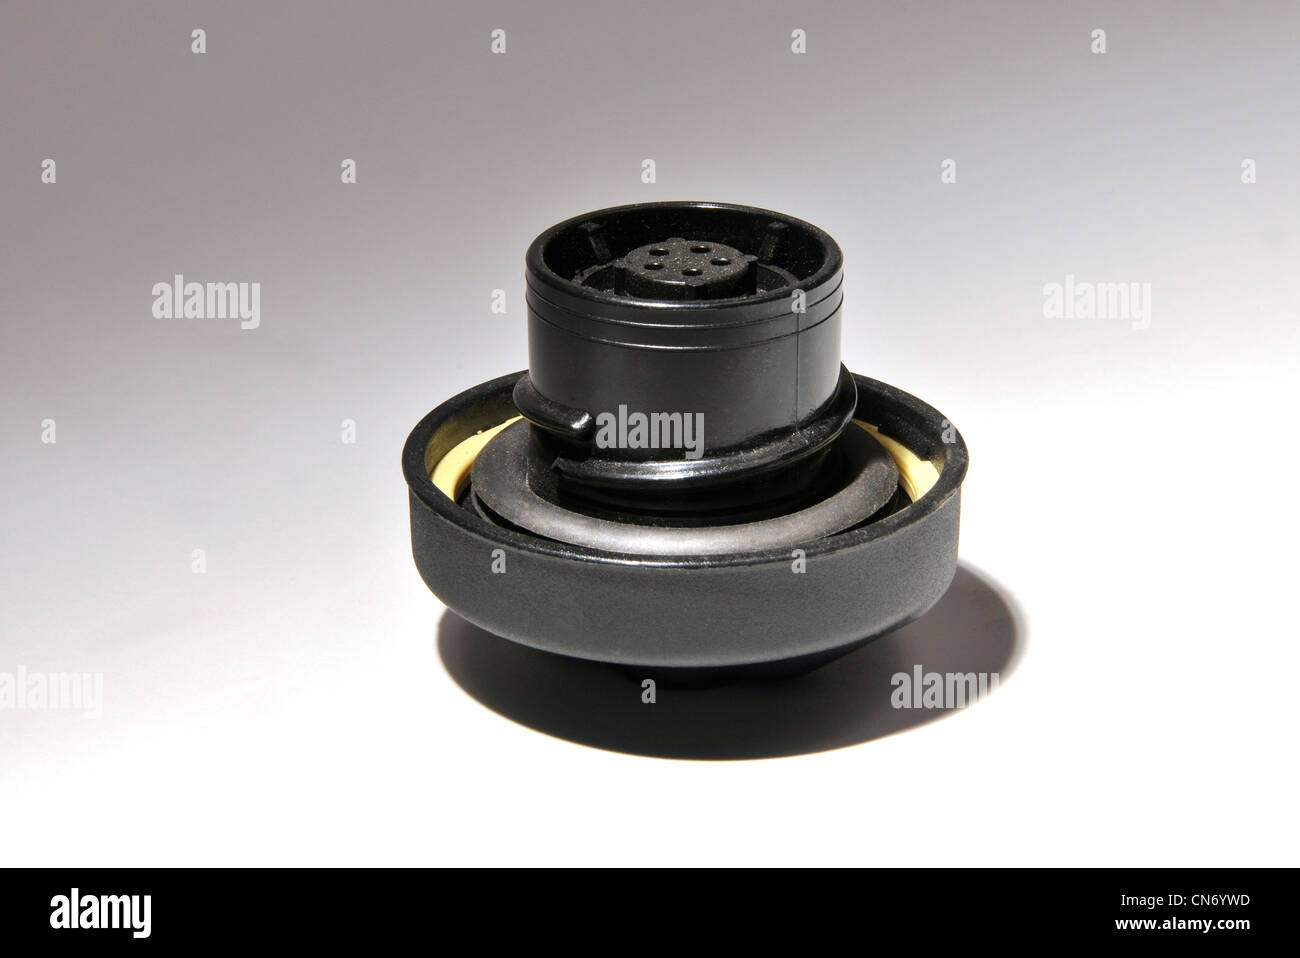 A fuel cap for an automobile. Stock Photo